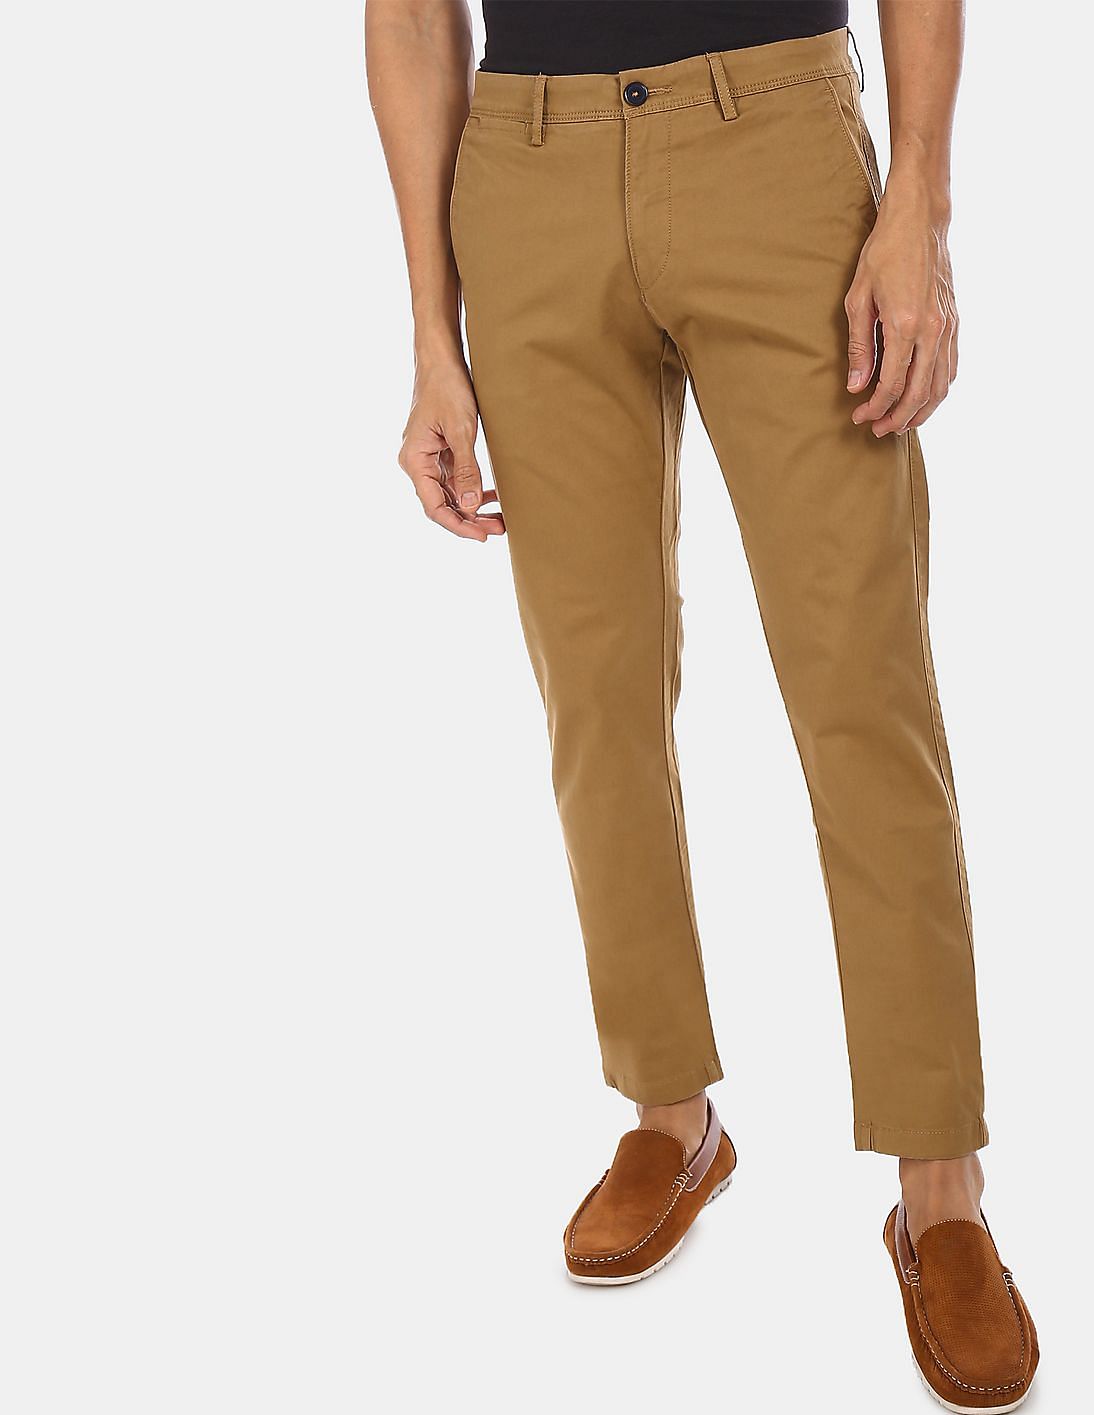 Classic Polo Casual Trousers  Buy Classic Polo Mens Cotton Solid Slim Fit  Dark Grey Color Trouser Online  Nykaa Fashion